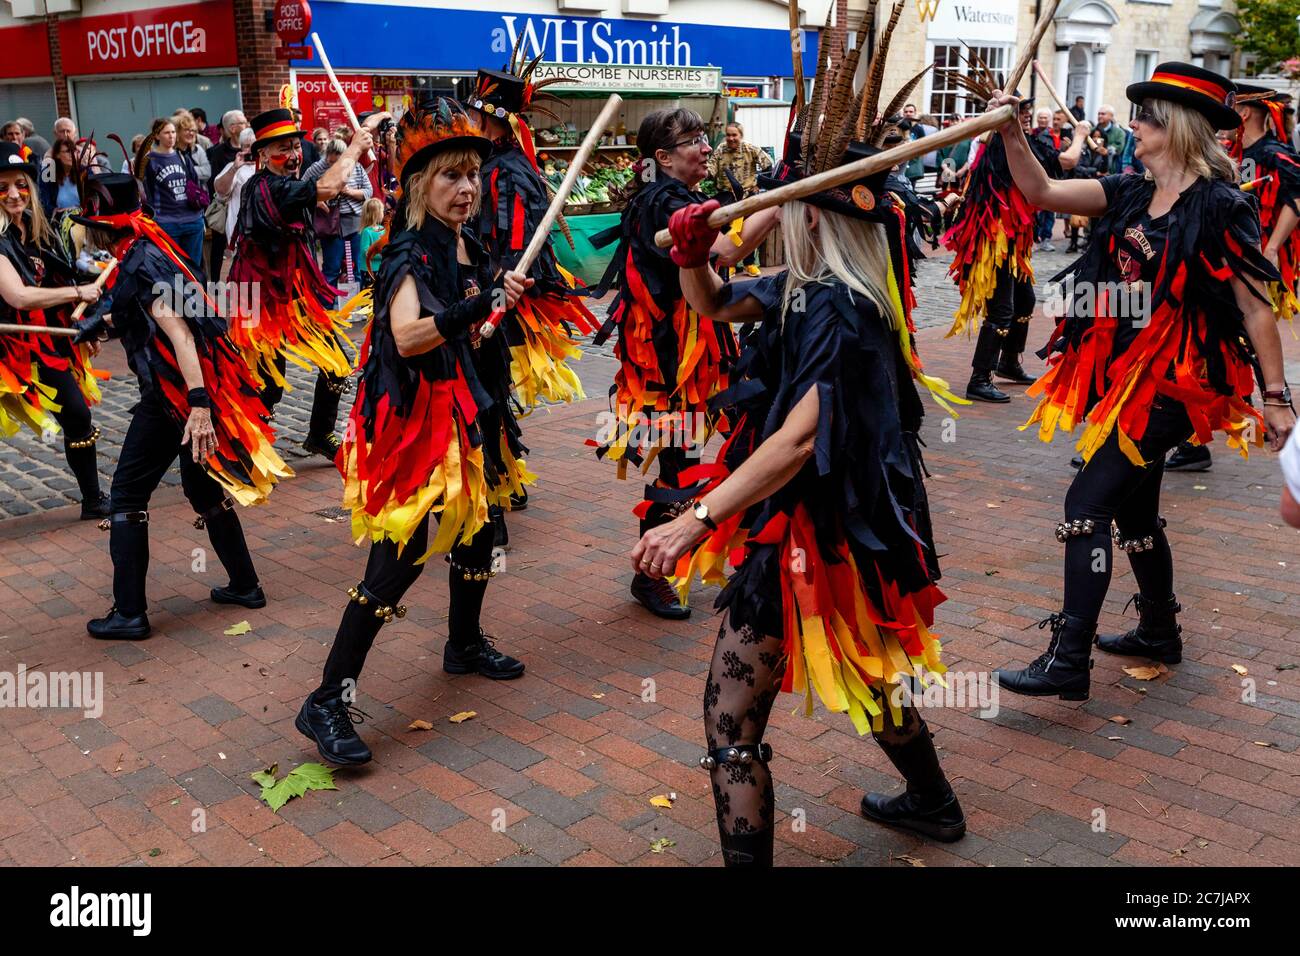 A Morris Dancing Side Perform During The Lewes Folk Festival, High Street, Lewes, East Sussex, UK Stock Photo